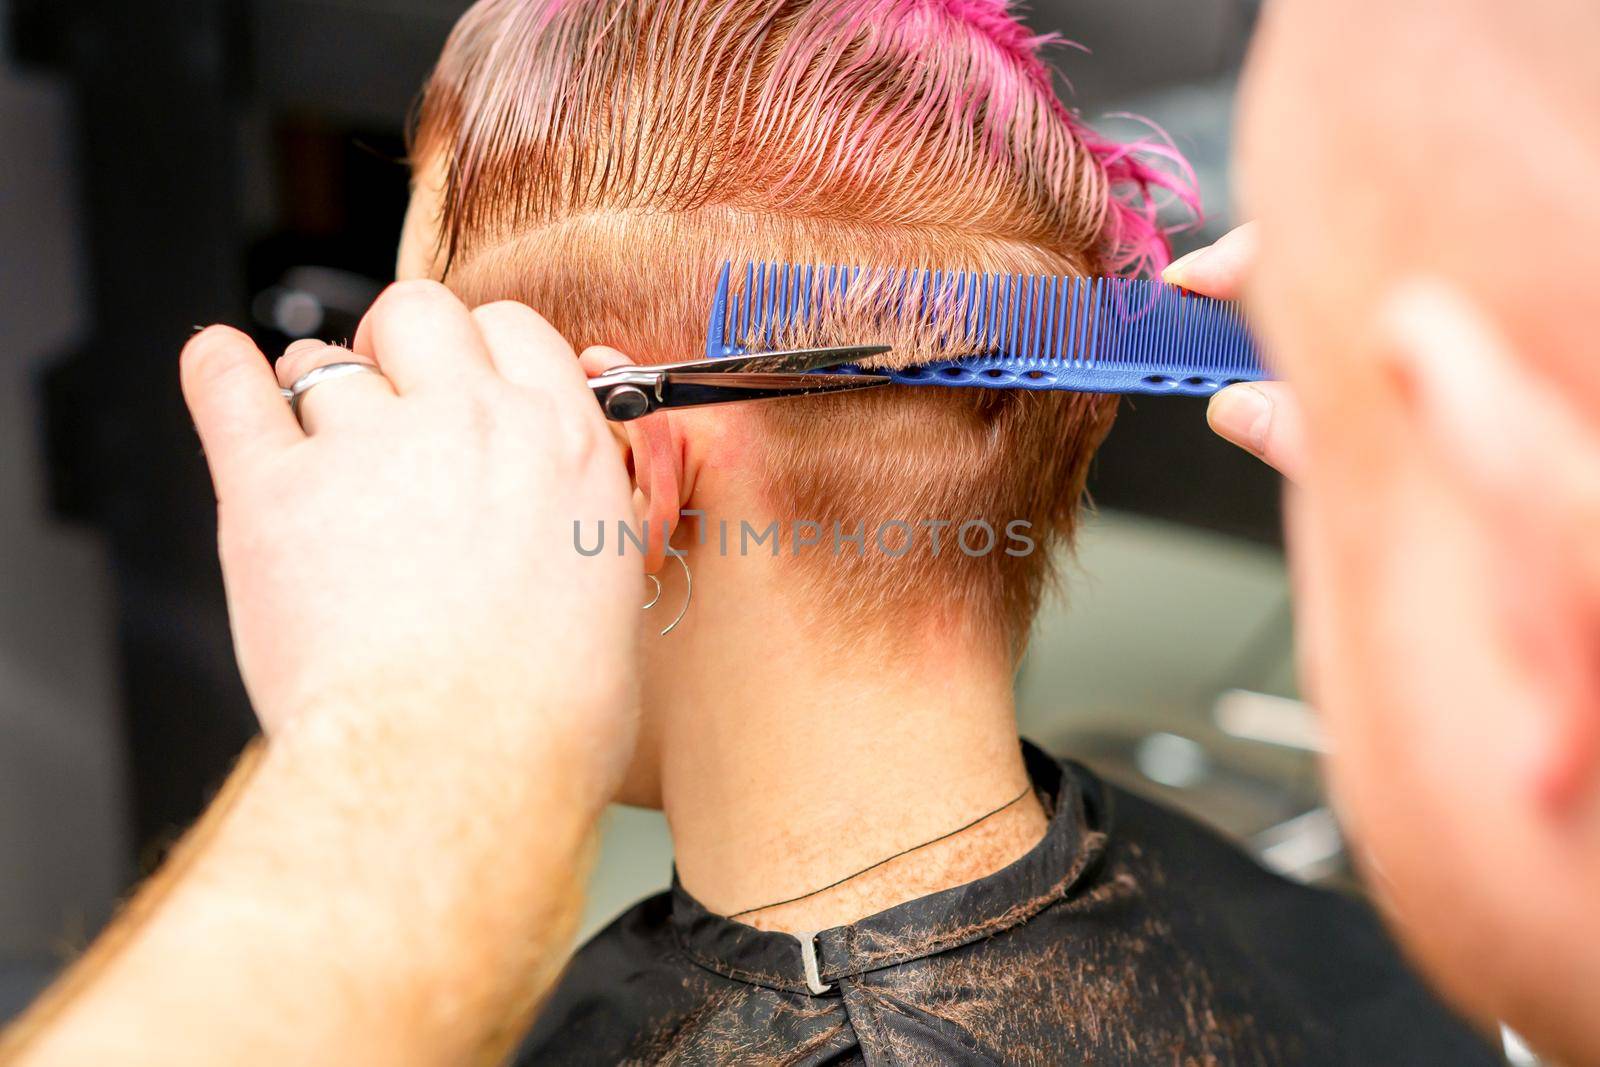 Haircut of dyed short pink wet hair of young caucasian woman by a male hairdresser in a barbershop. by okskukuruza